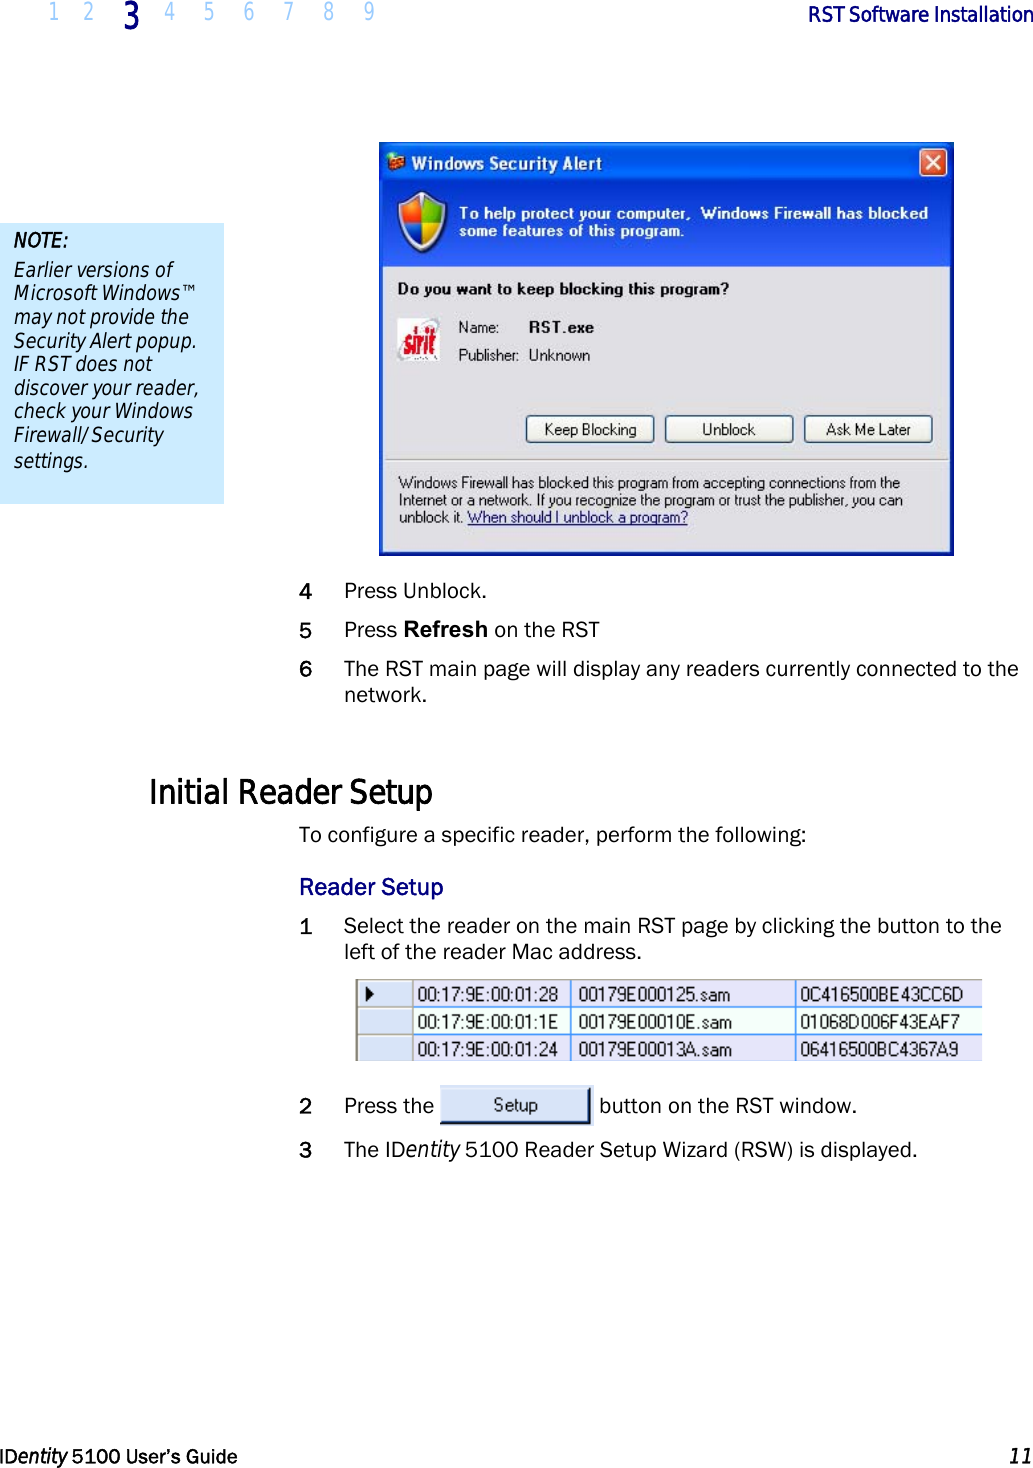  1 2 3 4 5 6 7 8 9       RST Software Installation   IDentity 5100 User’s Guide  11   4 Press Unblock. 5 Press Refresh on the RST 6 The RST main page will display any readers currently connected to the network.  Initial Reader Setup To configure a specific reader, perform the following: Reader Setup 1 Select the reader on the main RST page by clicking the button to the left of the reader Mac address.  2 Press the  button on the RST window. 3 The IDentity 5100 Reader Setup Wizard (RSW) is displayed. NOTE: Earlier versions of Microsoft Windows™ may not provide the Security Alert popup. IF RST does not discover your reader, check your Windows Firewall/Security settings. 